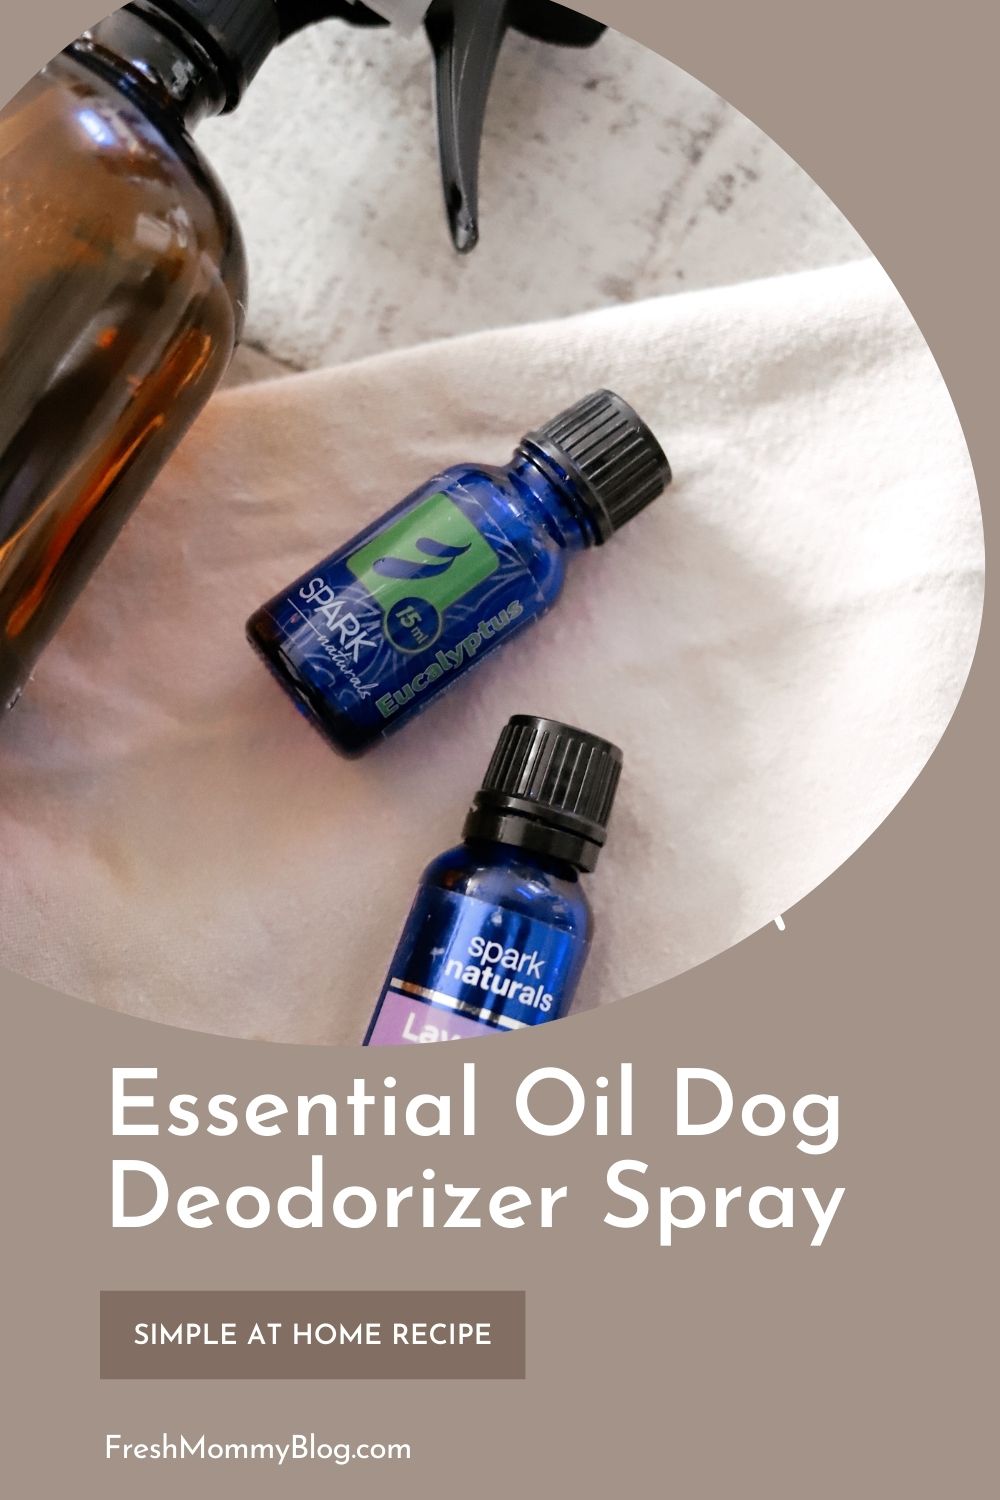 Essential Oils Safe for Dog Deodorizer Spray |Dog Deodorizer Spray by popular Florida lifestyle blog, Fresh Mommy Blog: Pinterest image of a glass amber spray bottle lying next to a bottle of Spark Naturals eucalyptus oil and Spark Naturals Lavender oil. 